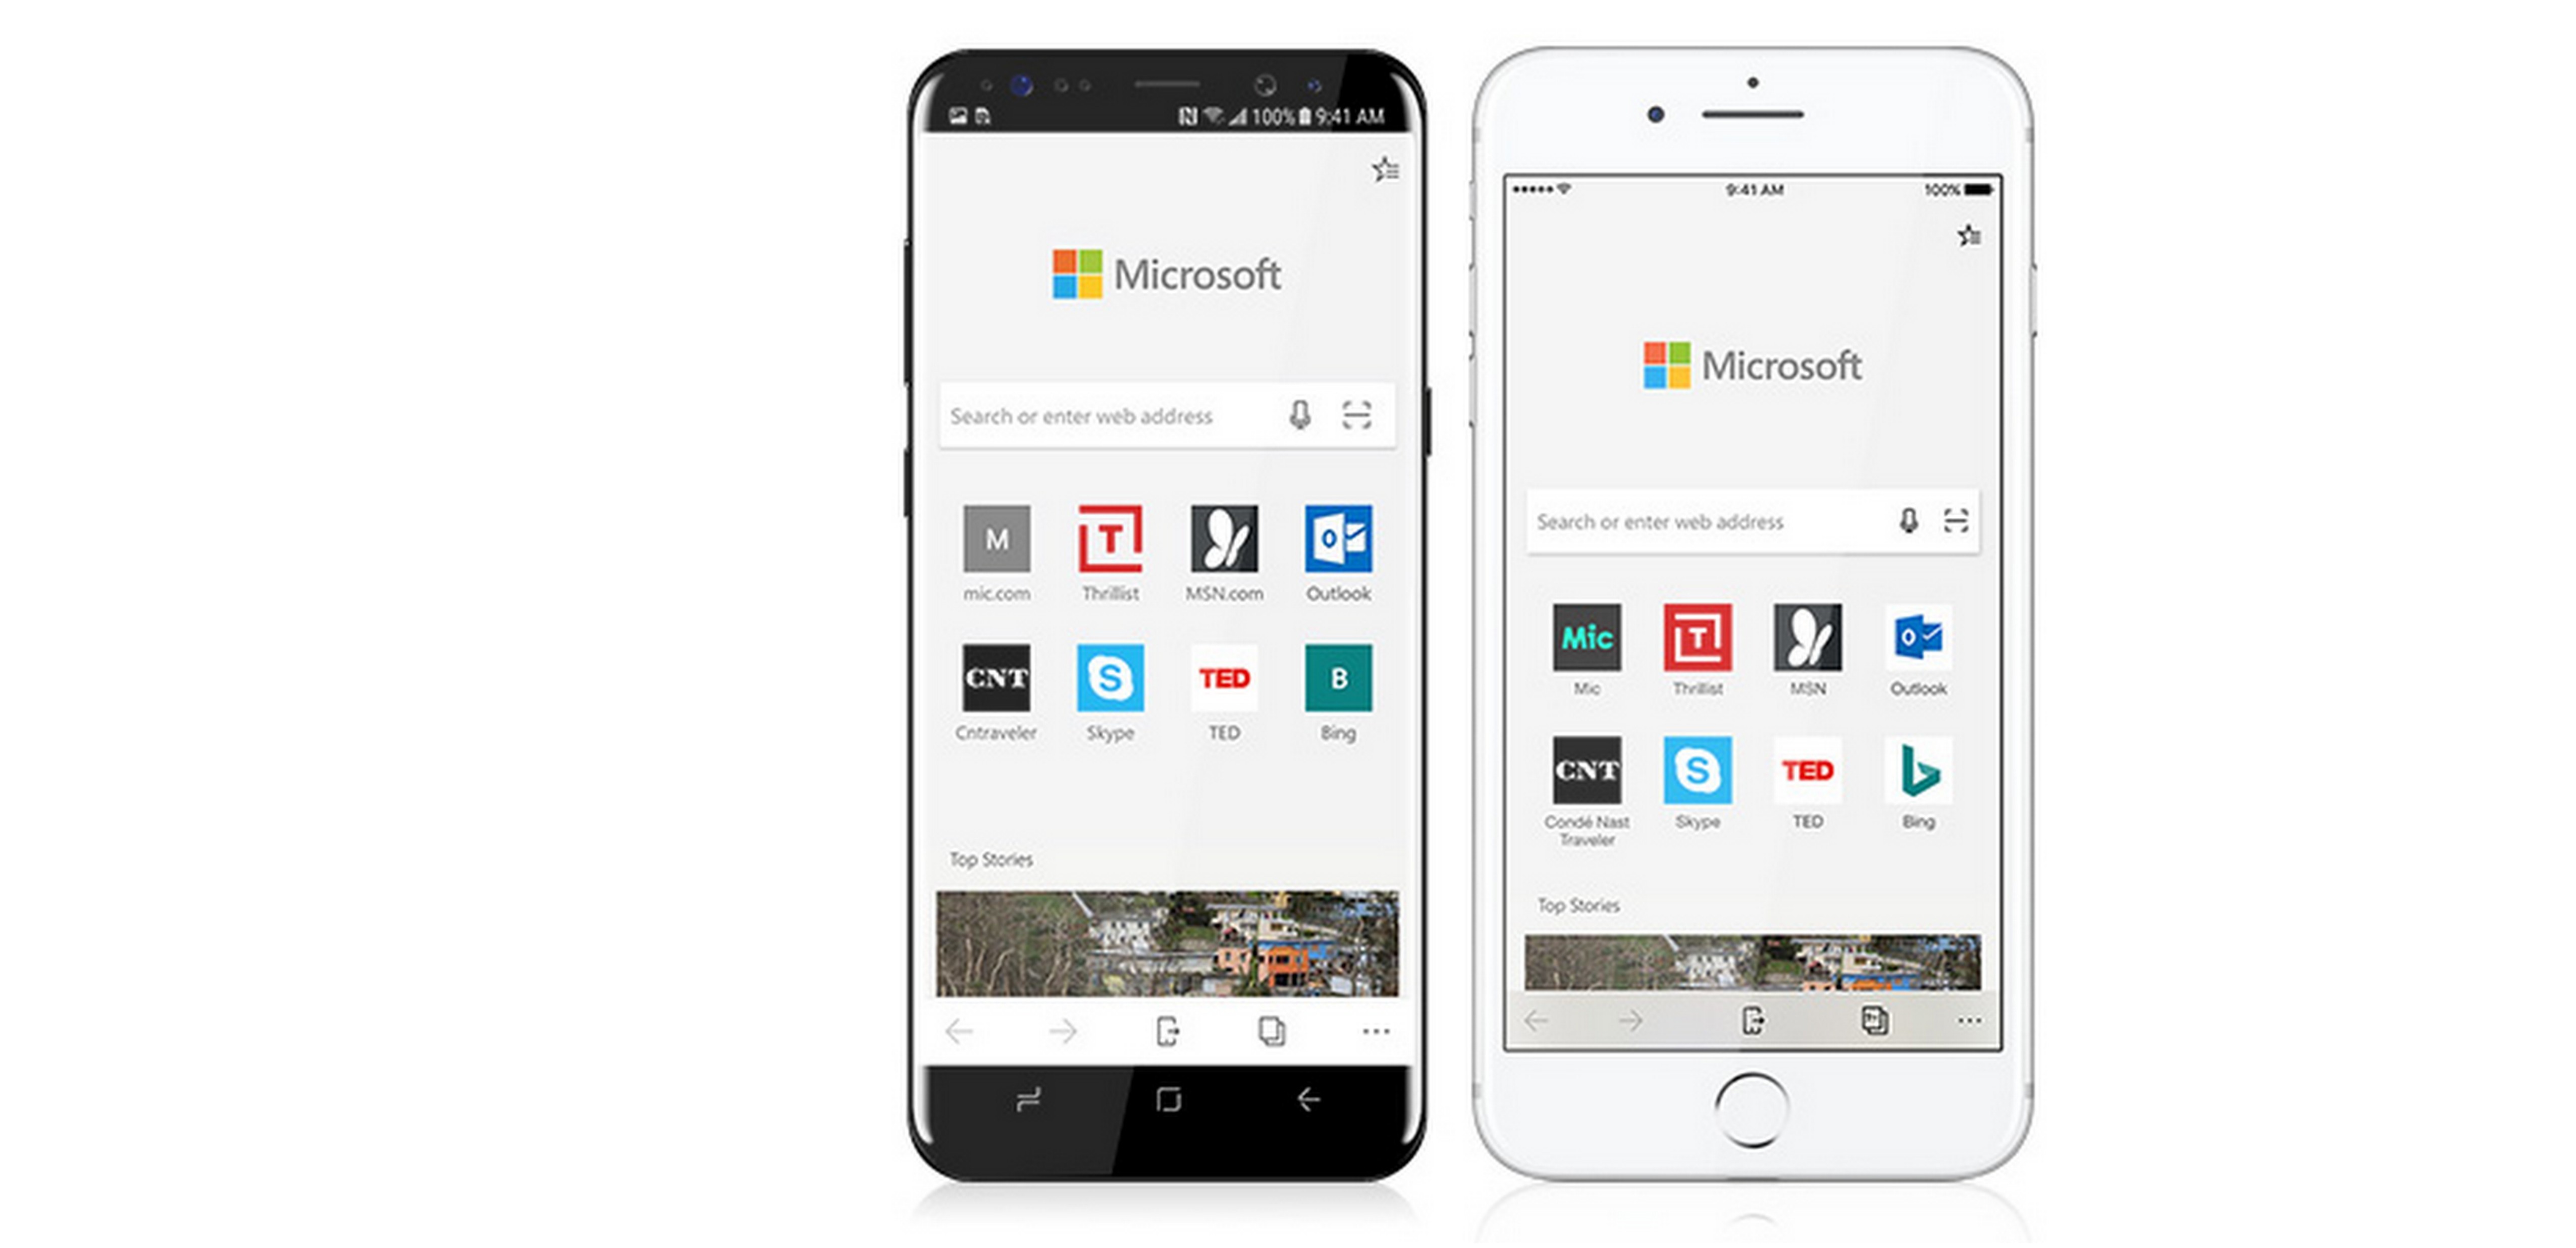 Microsoft Edge shown on an iPhone and Android phone